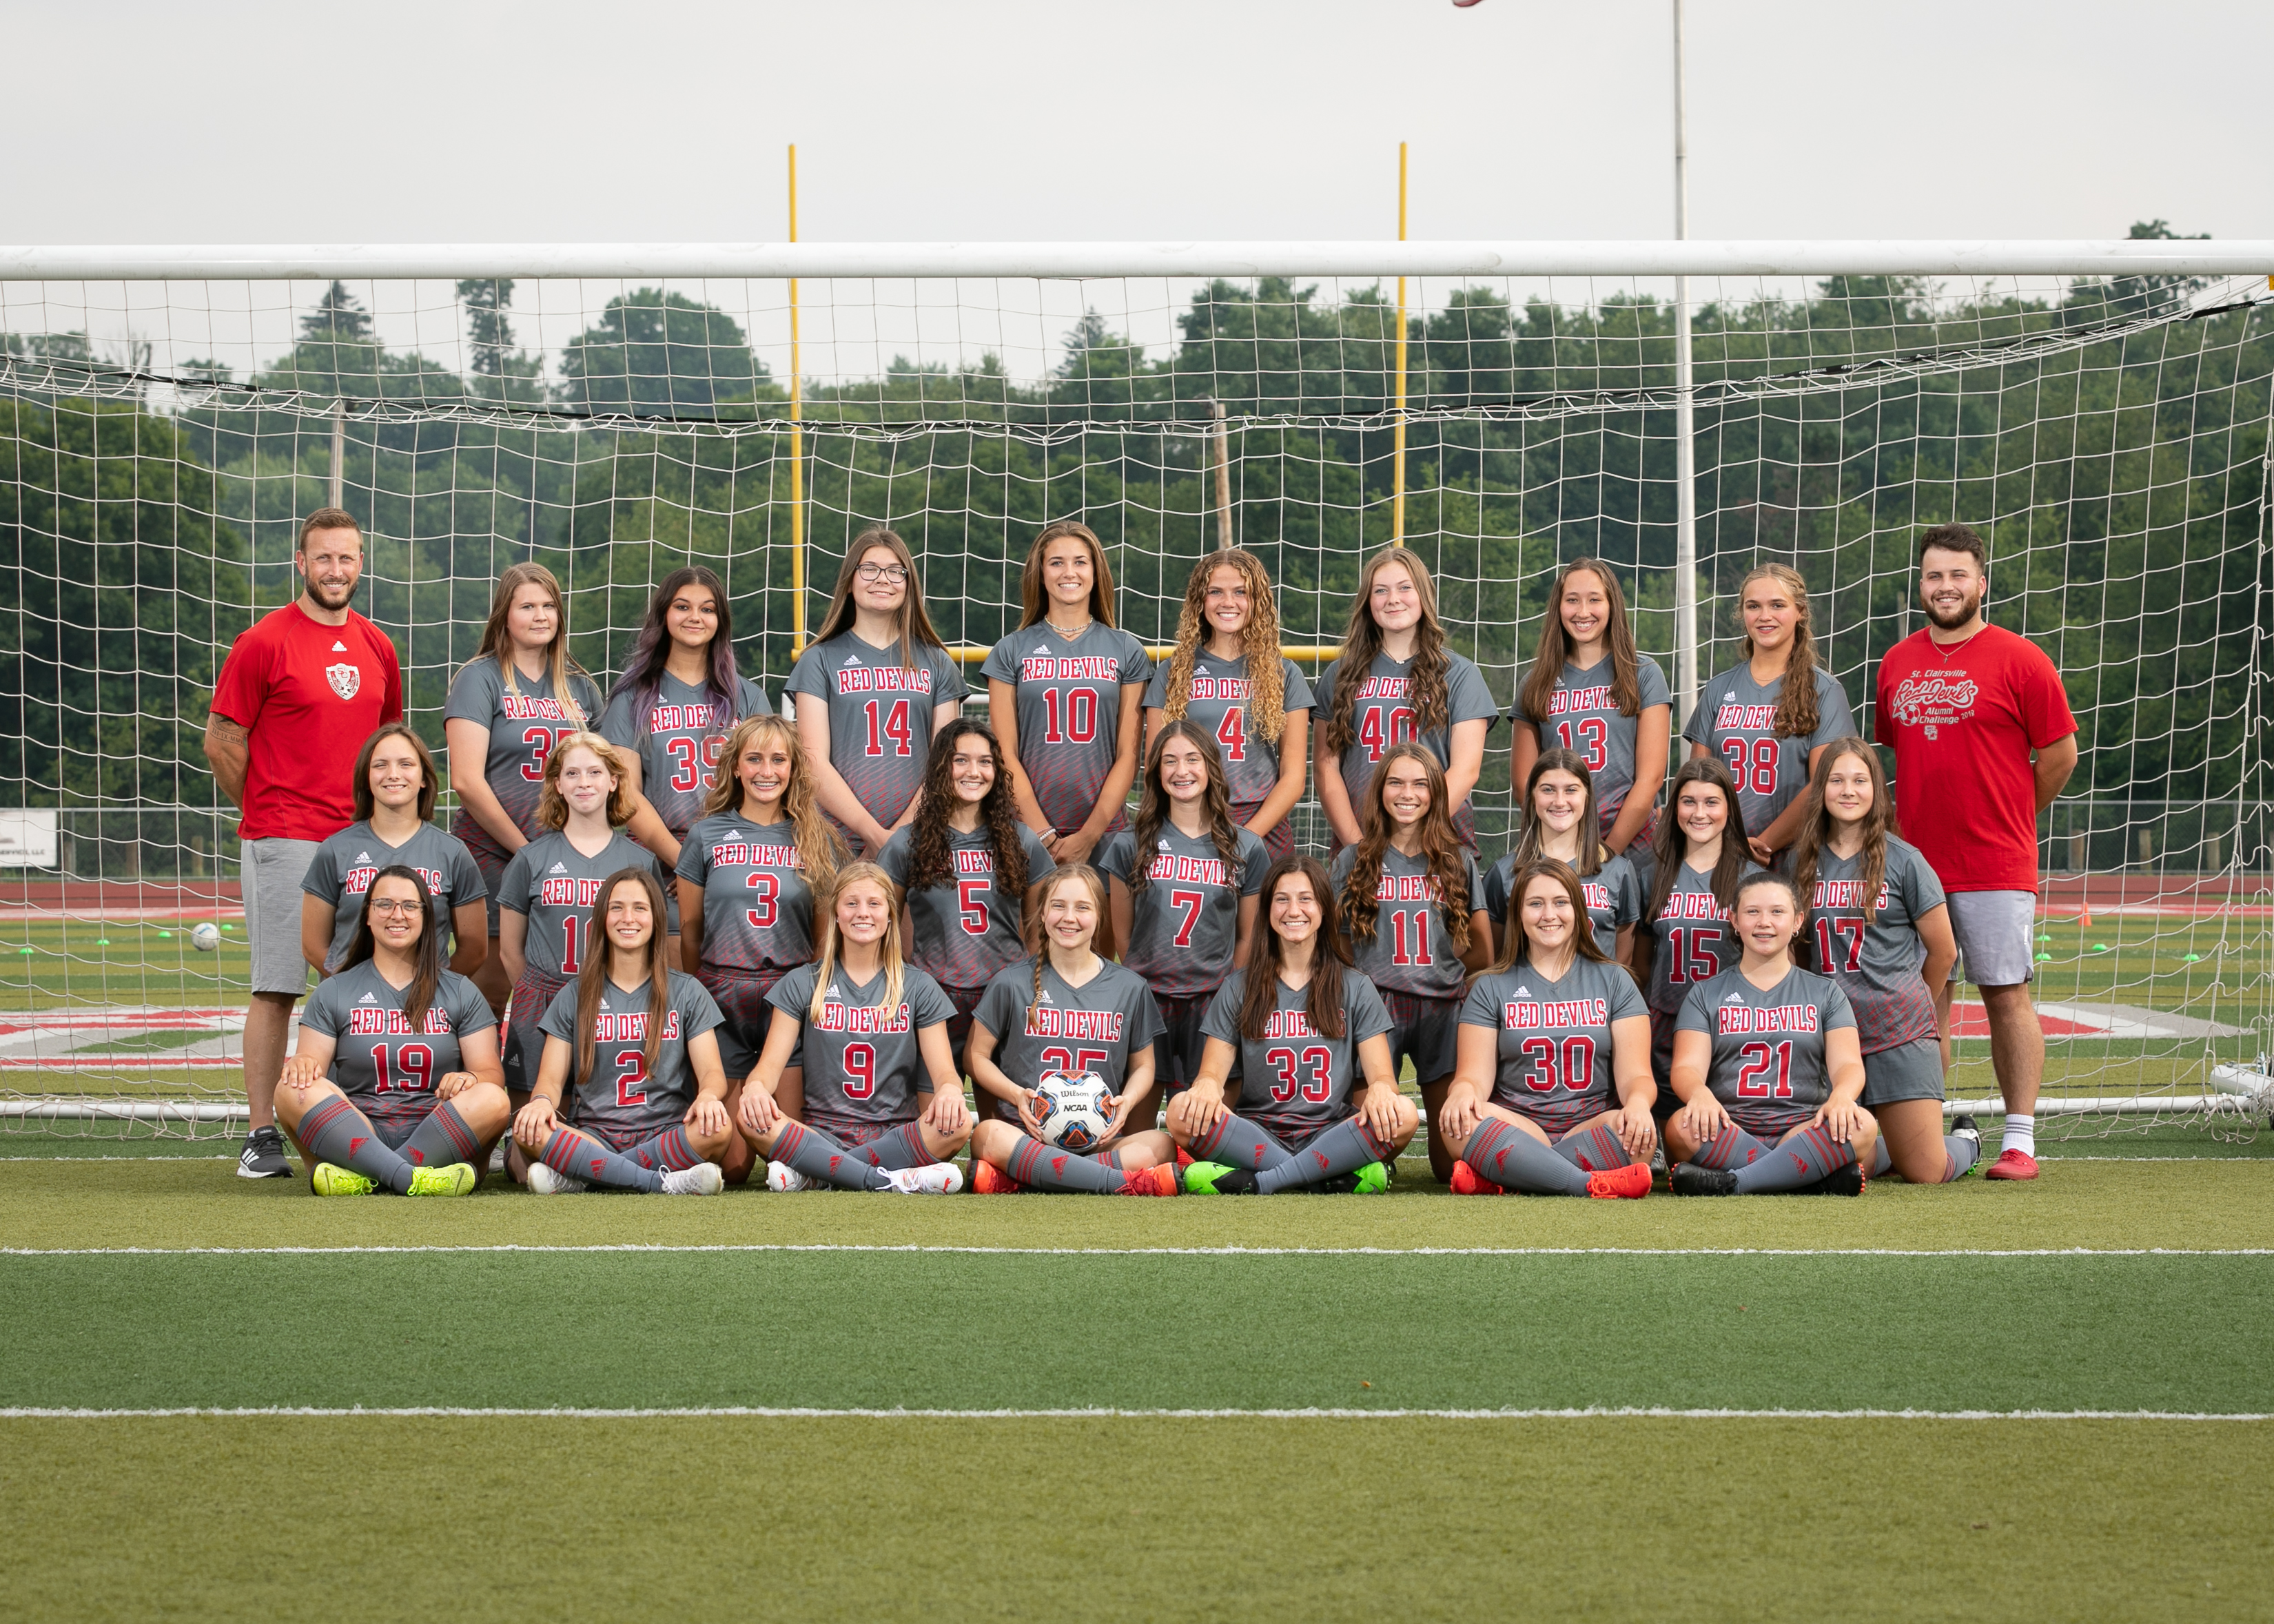 Girls soccer team picture